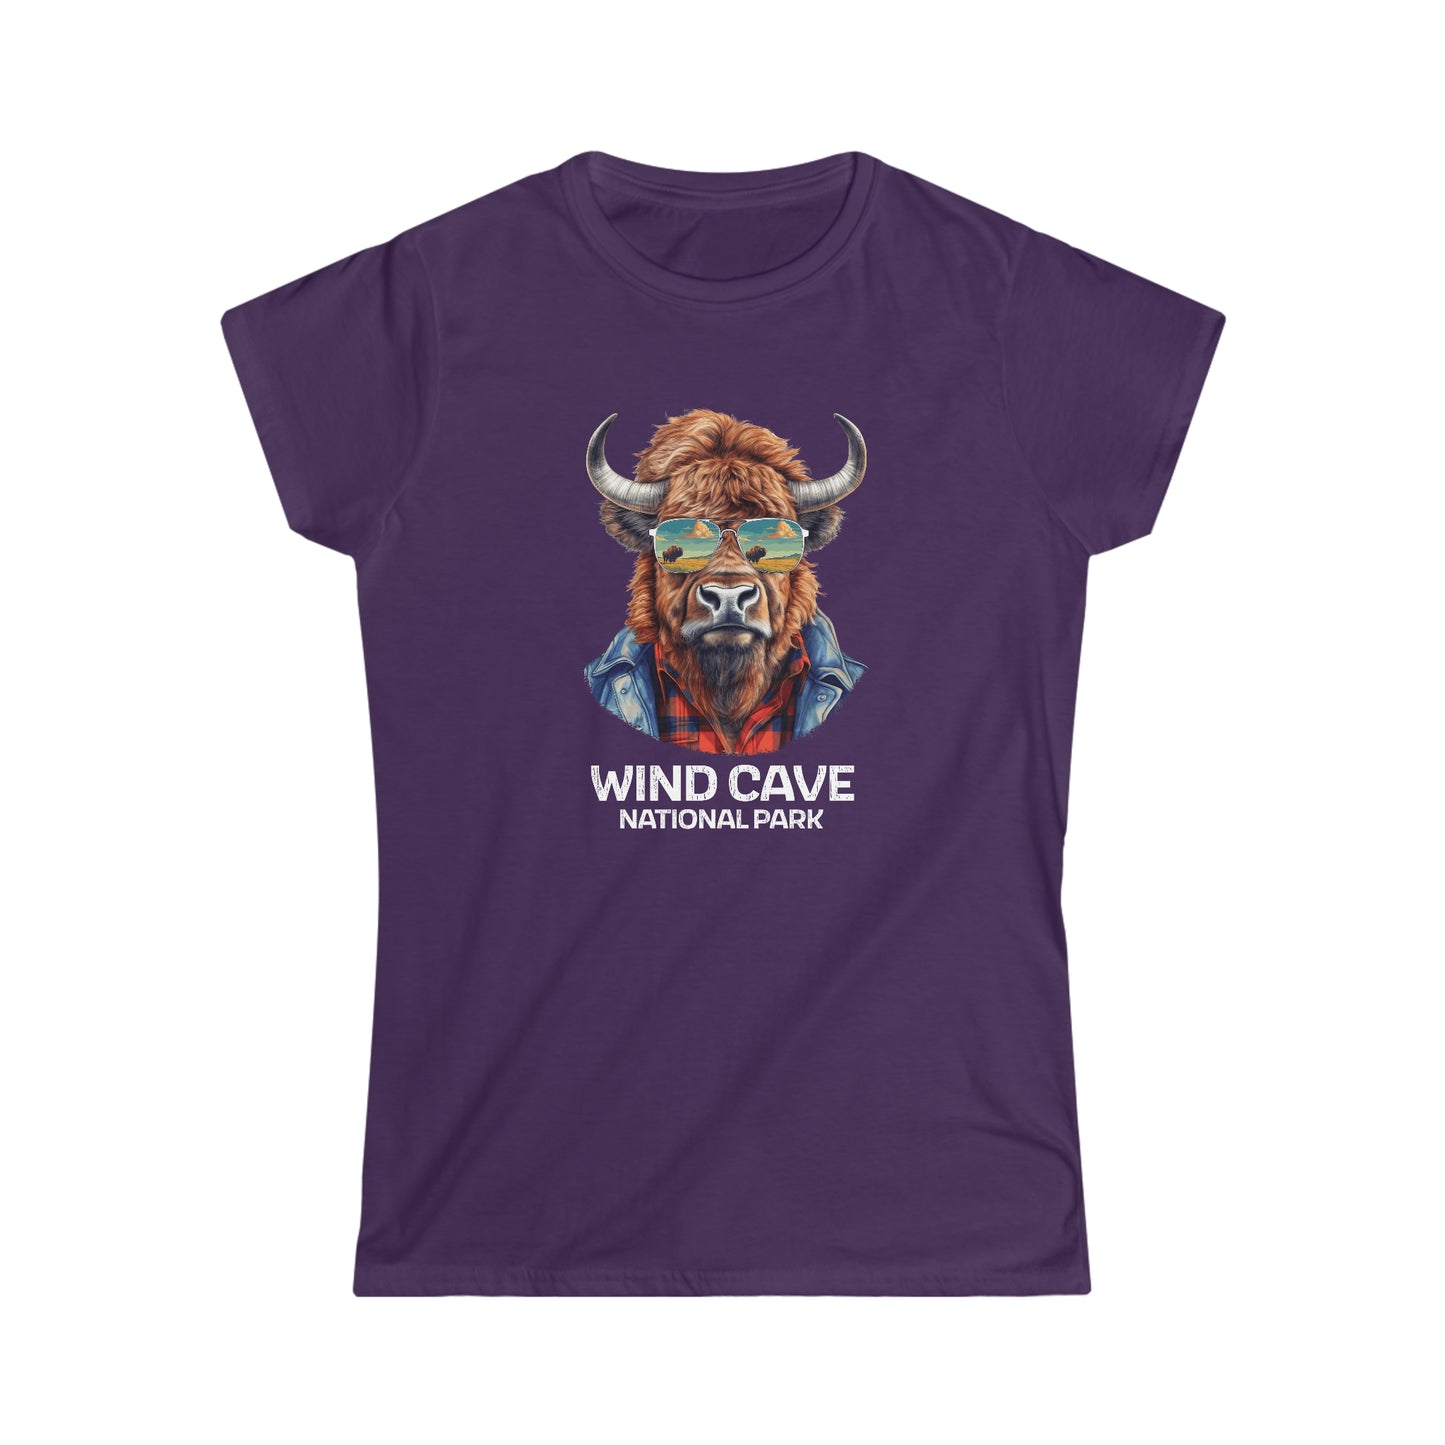 Wind Cave National Park Women's T-Shirt - Cool Bison